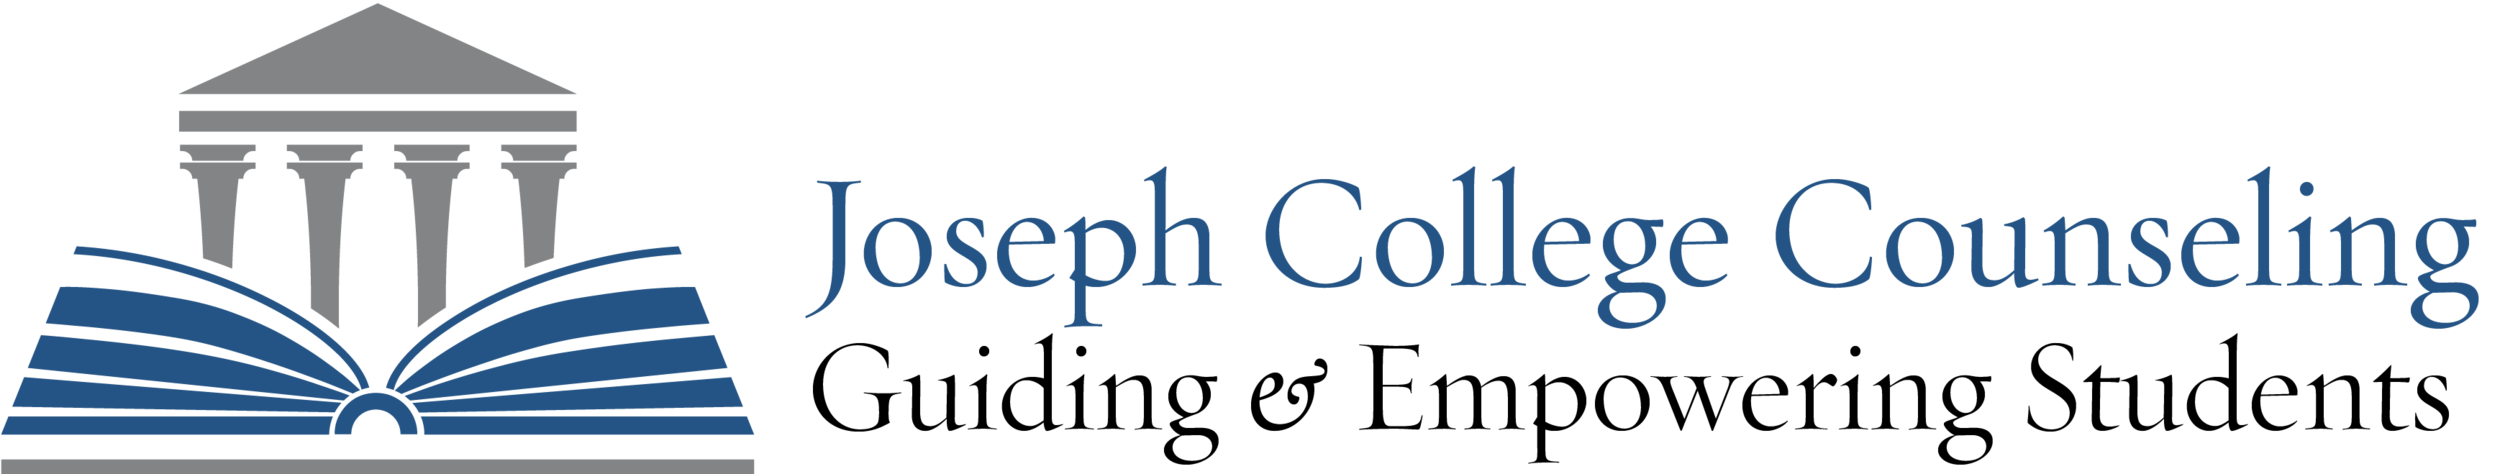 Joseph College Counseling | College Counseling In Bergen County